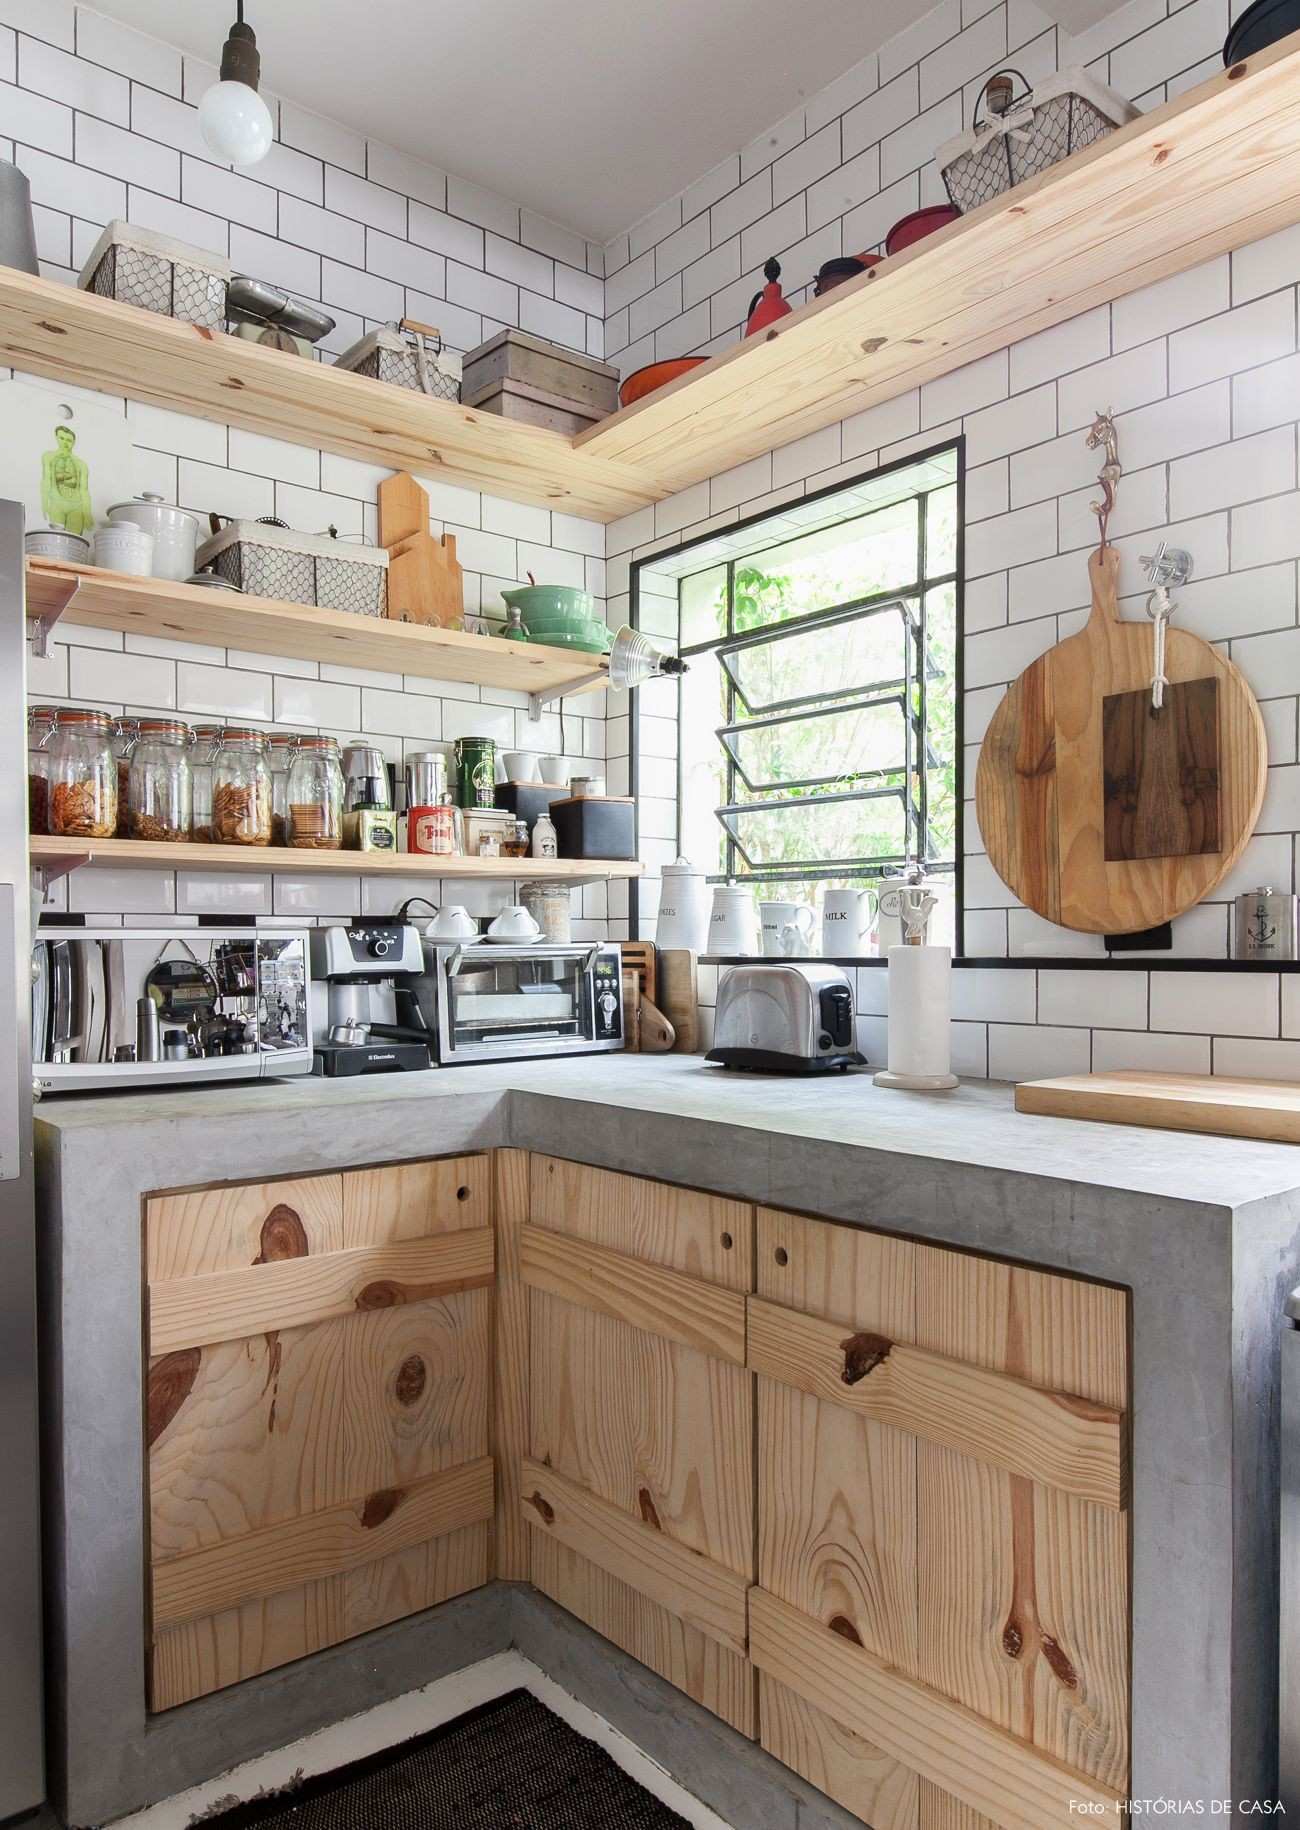 318 Another kitchen shelving system using woods and rustic plan via simphome